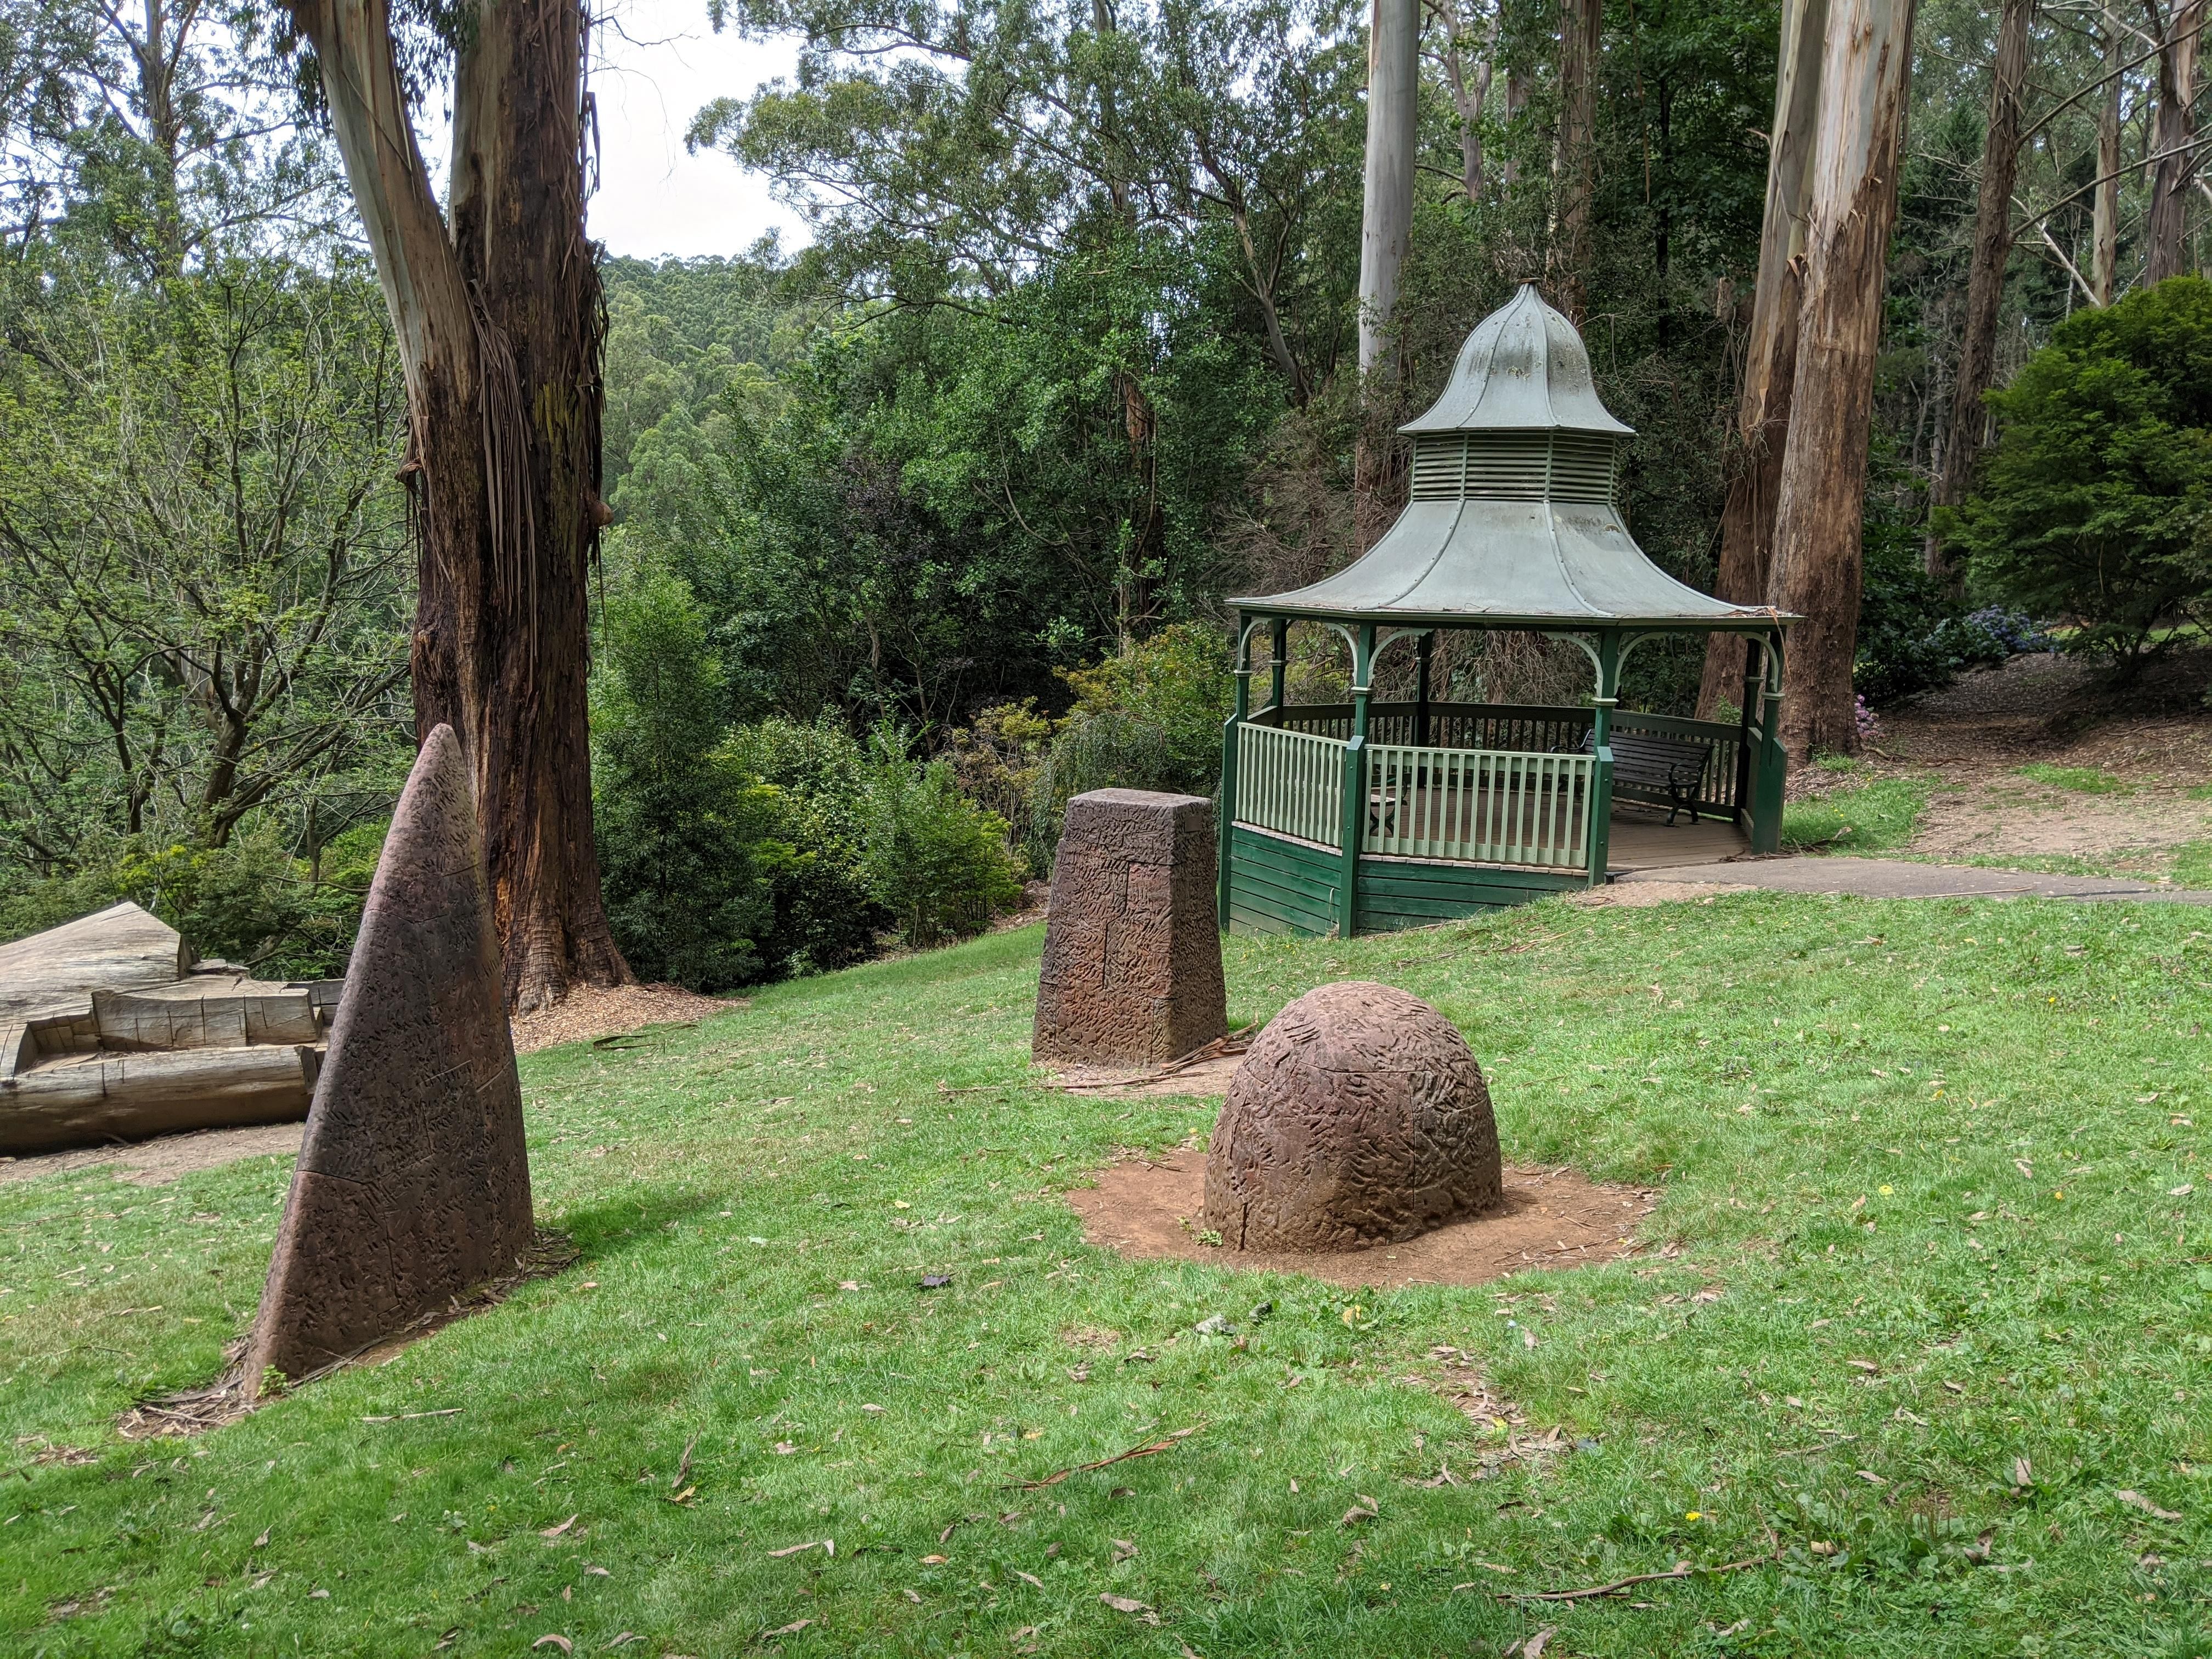 Caption: A rest area overlooking the gardens